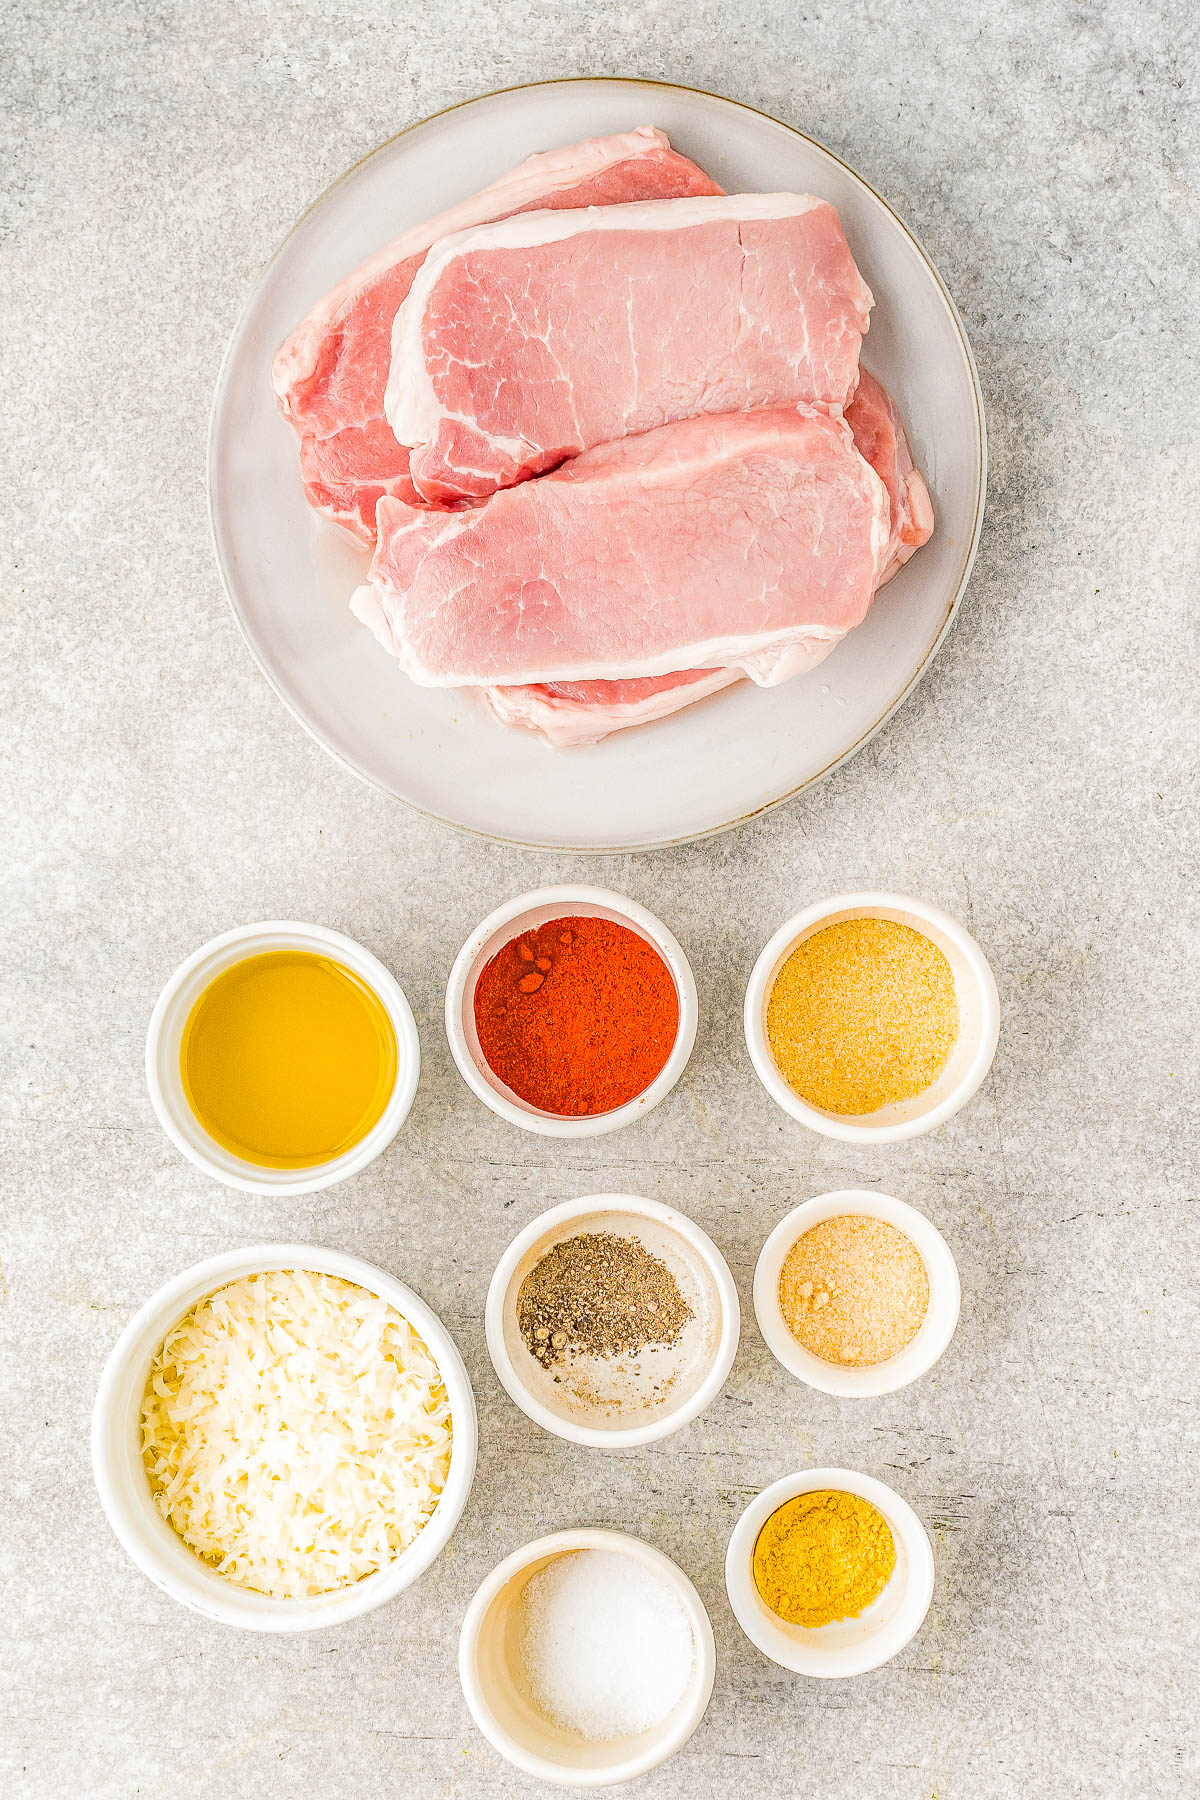 Air Fryer Pork Chops - Coated in Parmesan cheese and a rich spice rub, these air fried pork chops are perfectly crispy on the outside while staying tender and moist on the inside! They're EASY, ready in 15 minutes, perfect for busy weeknights, and a healthier way to enjoy "fried" food. Oven-baking and grilling instructions also provided.